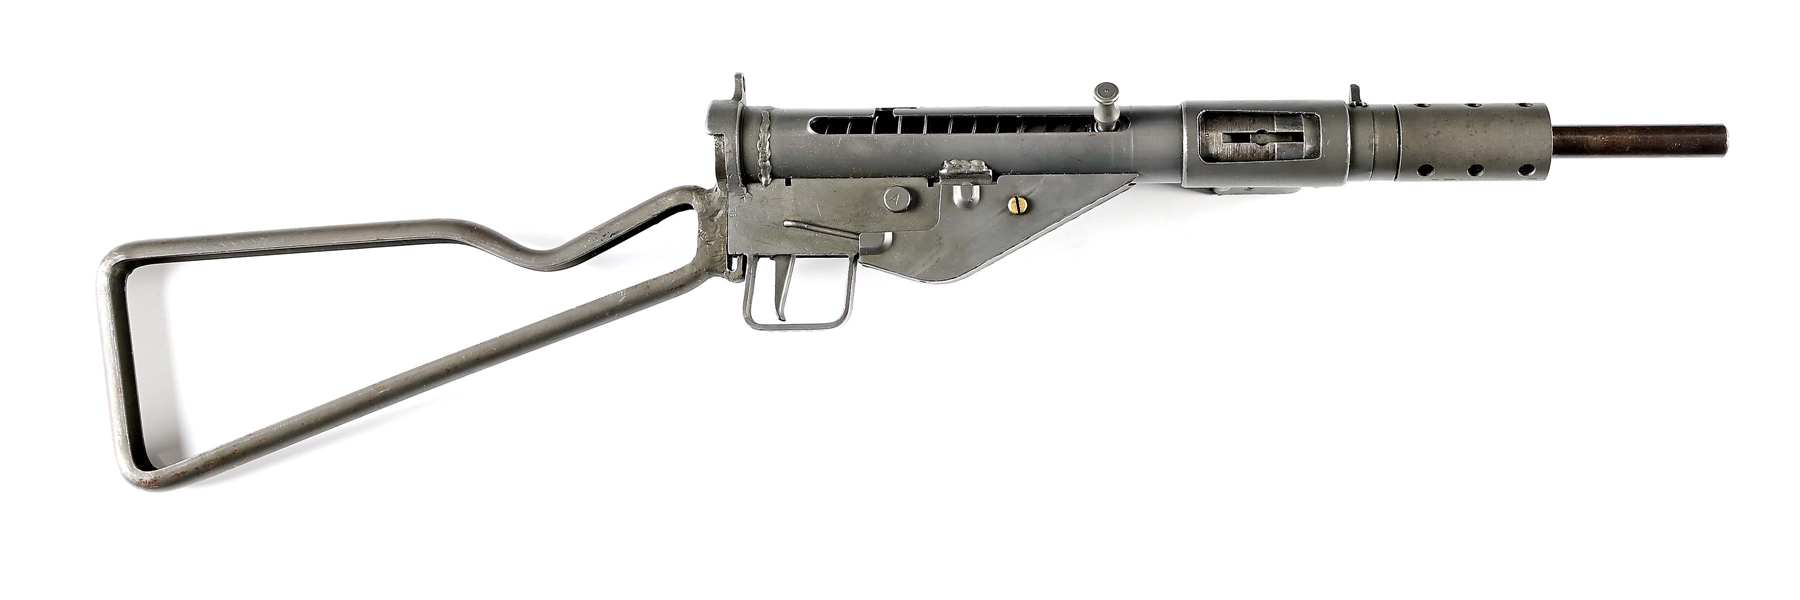 (N) SPECIAL WEAPONS CO. STEN MK II SUBMACHINE GUN (FULLY TRANSFERABLE).